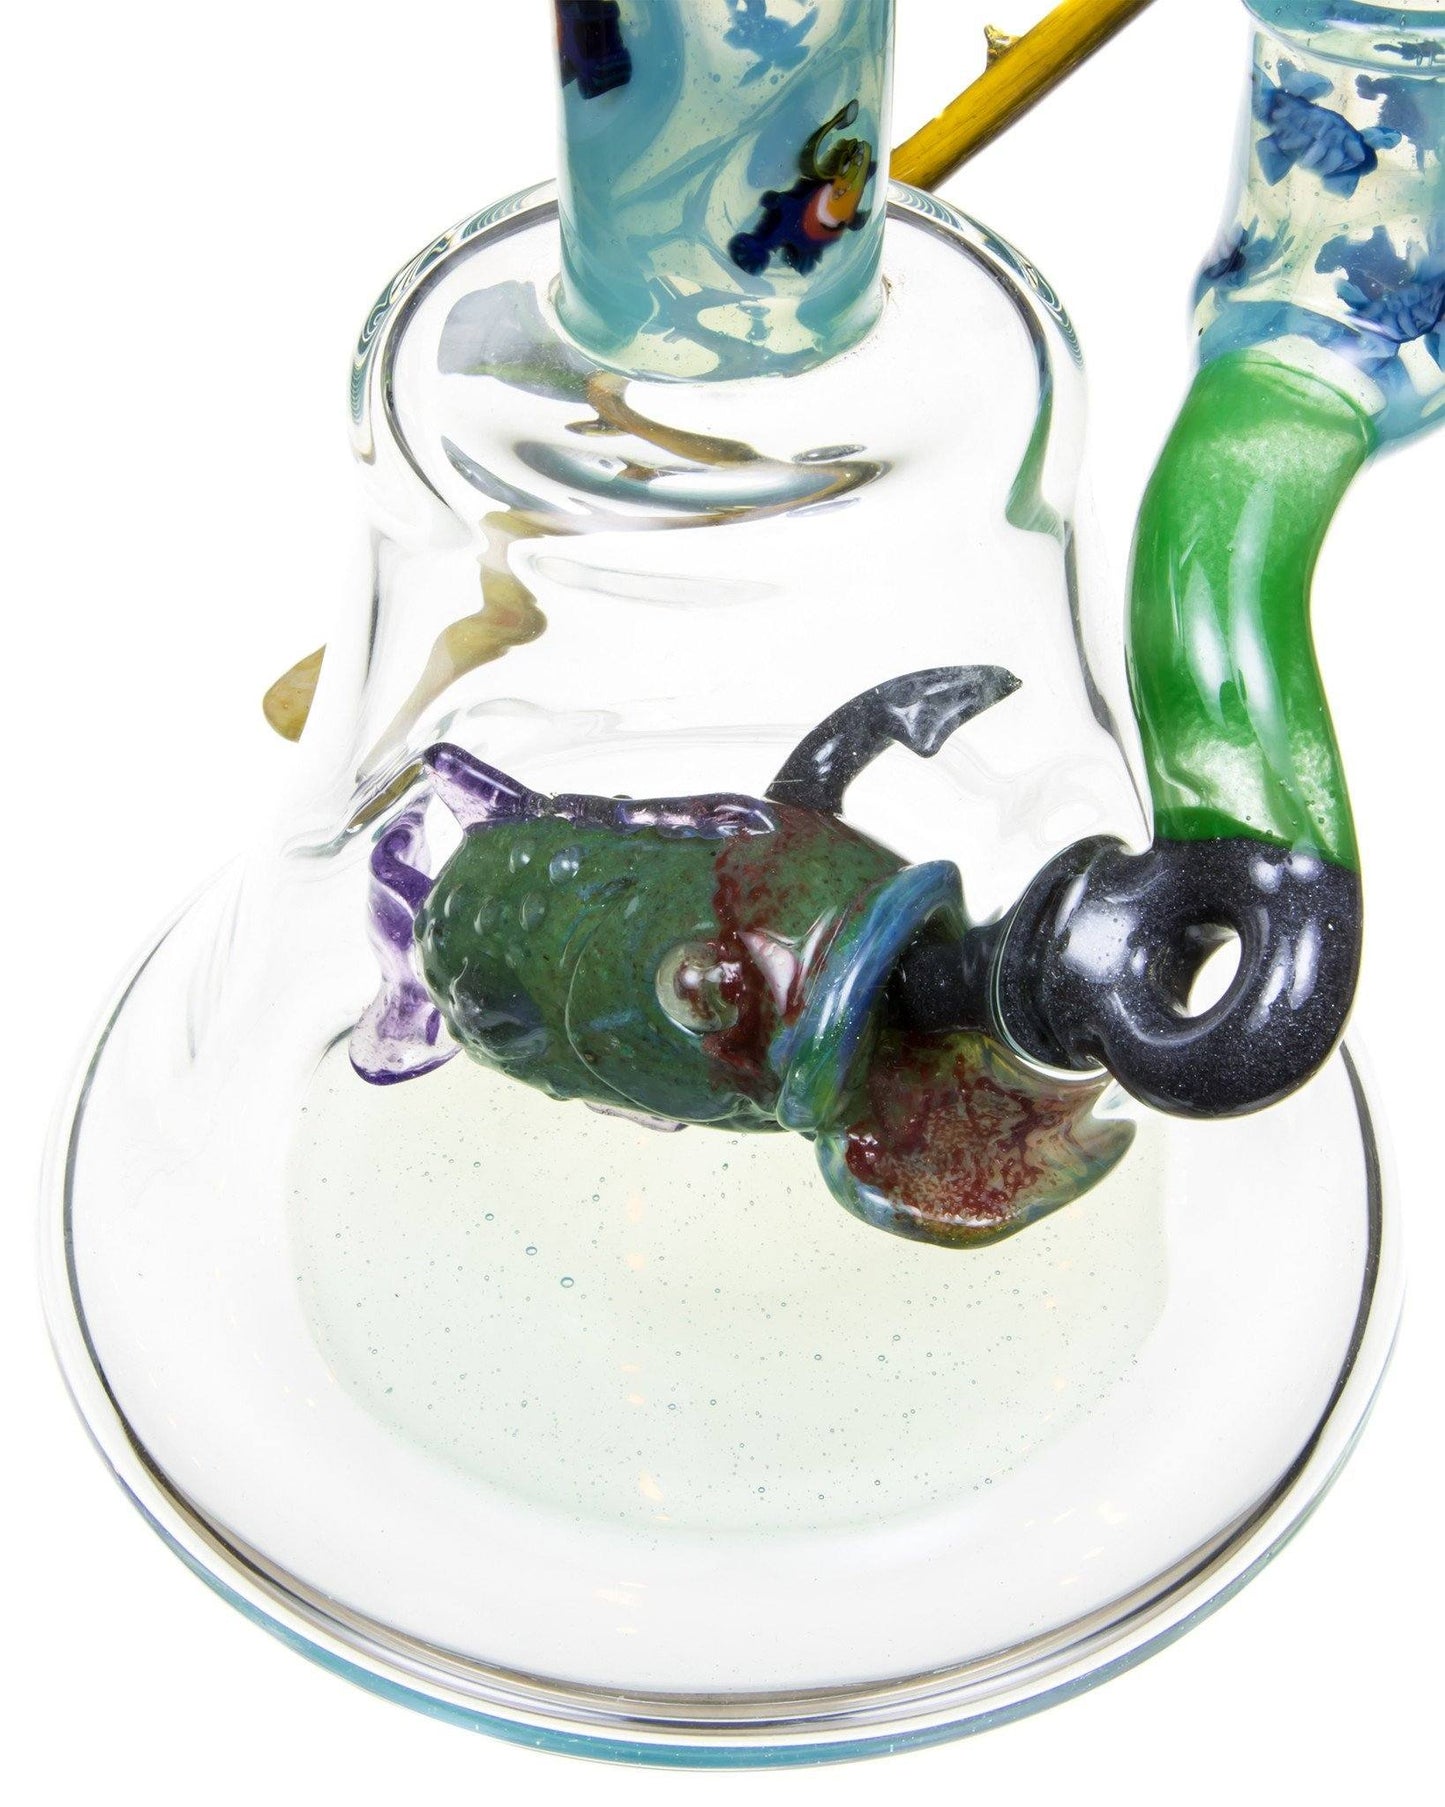 Hook Line And Sinker Heady Dab Rig at Flower Power Packages